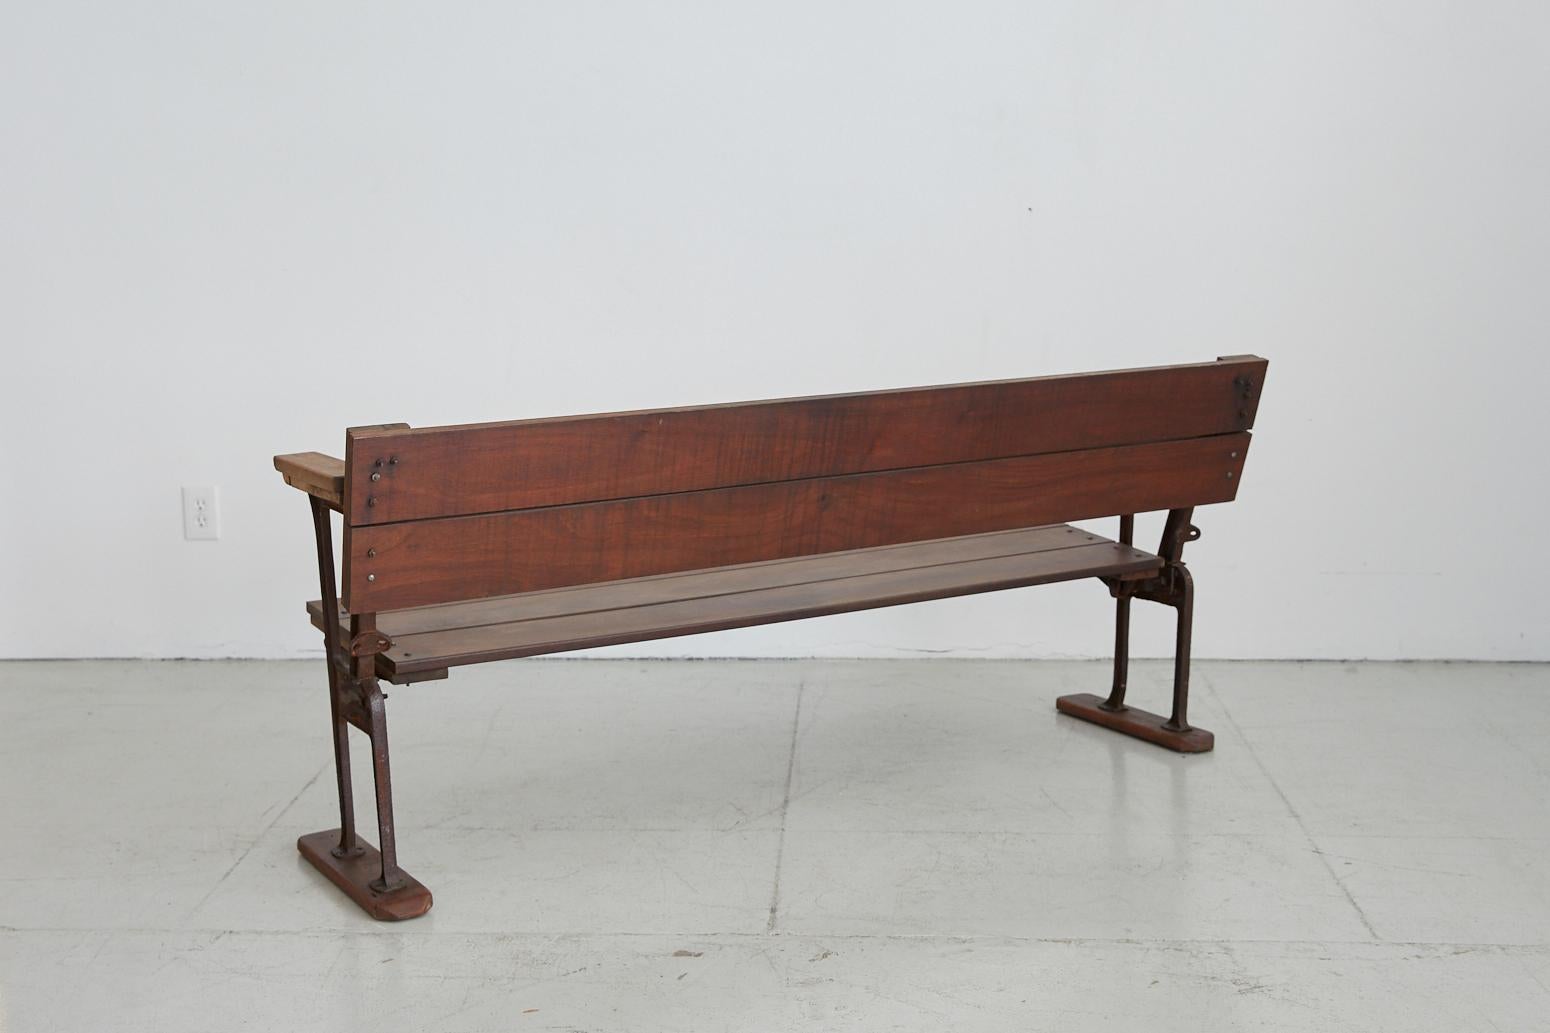 train station bench for sale